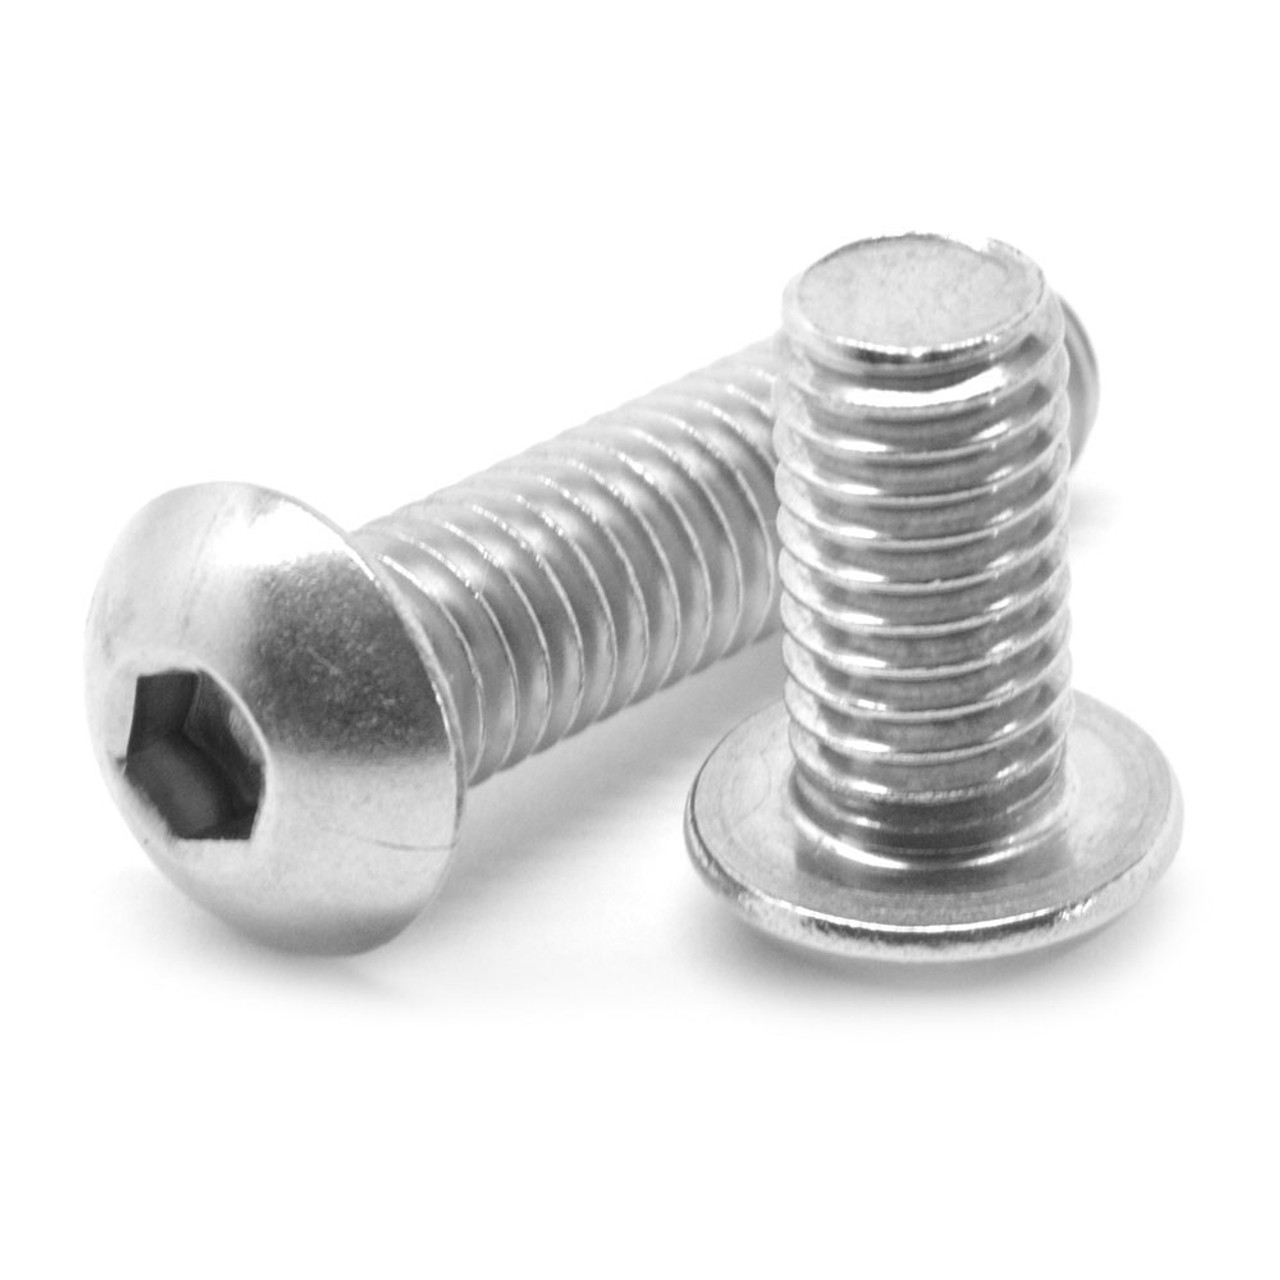 M12 x 1.75 x 30 MM (FT) Coarse Thread ISO 7380 Socket Button Head Cap Screw Stainless Steel 18-8